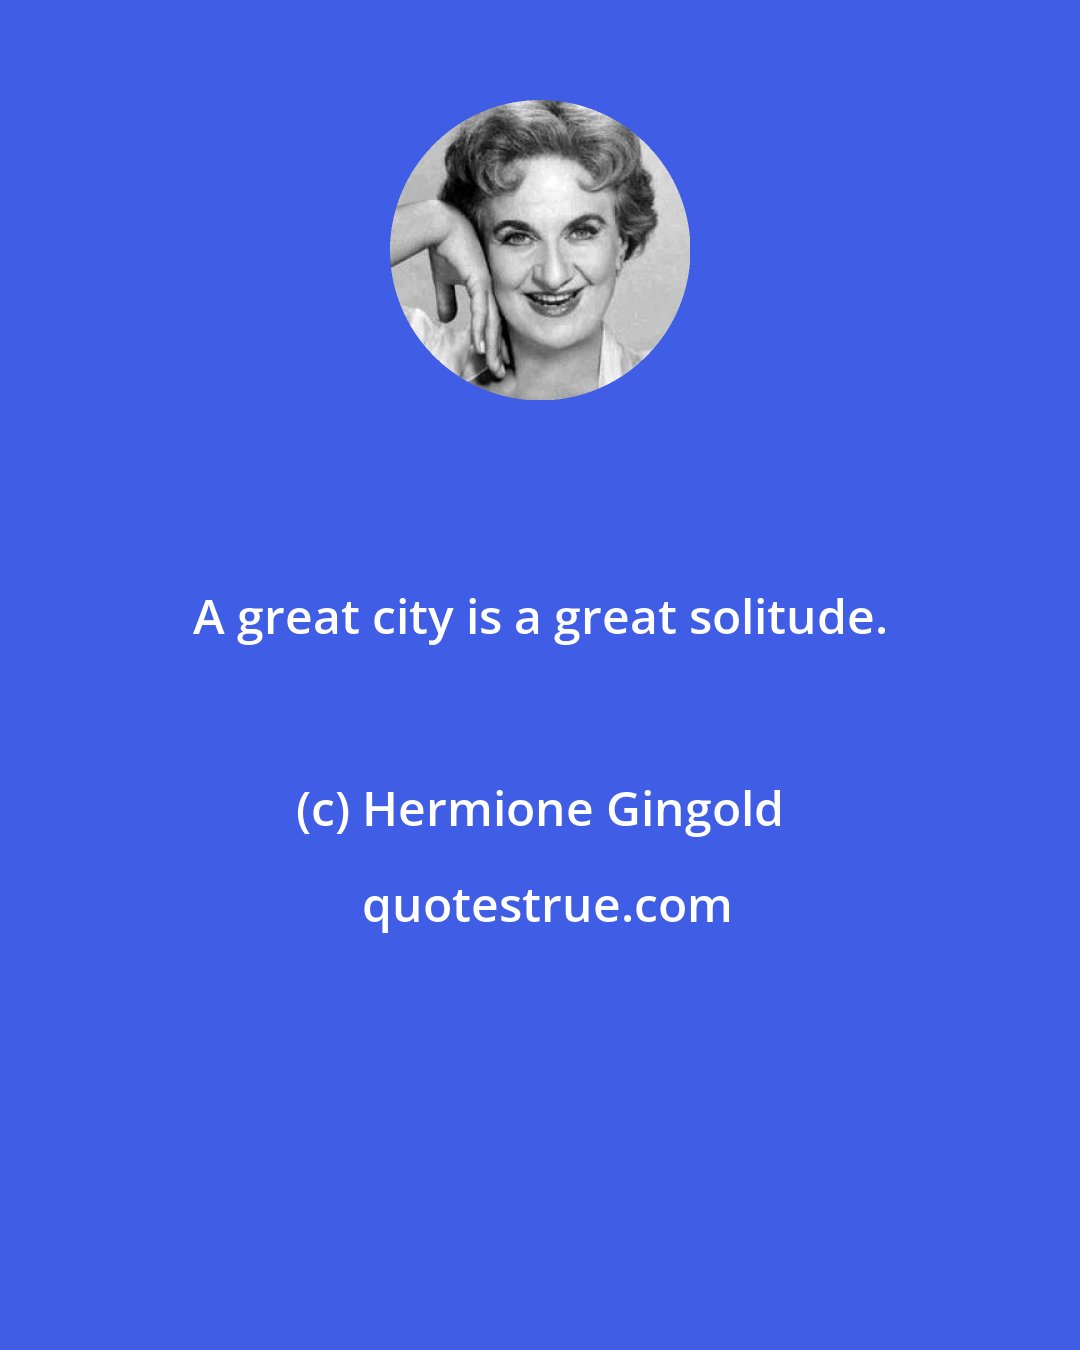 Hermione Gingold: A great city is a great solitude.